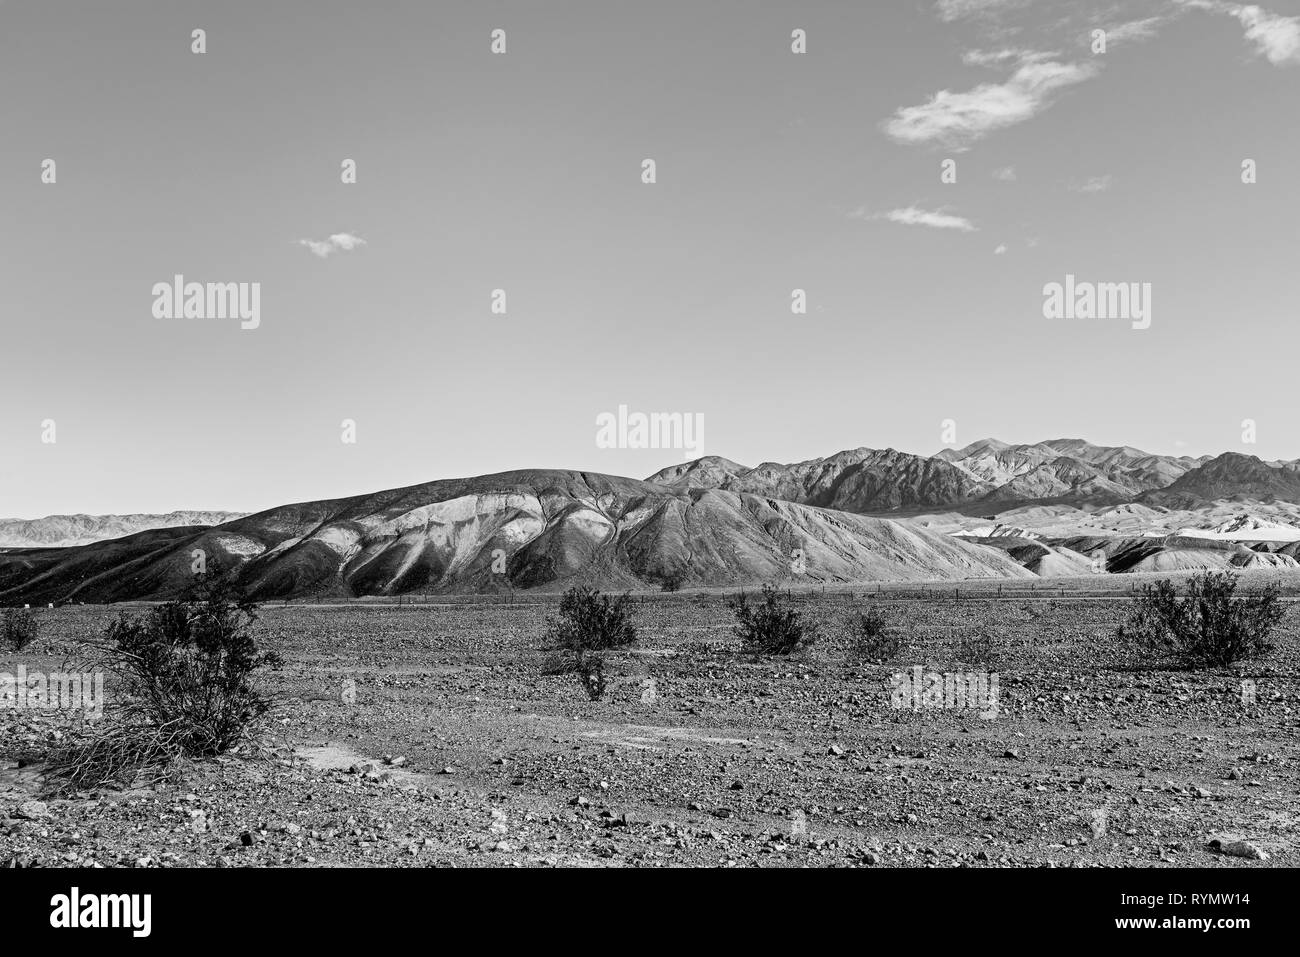 Black and white, sparse vegetation in rocky desert valley with barren hills beyond. Stock Photo